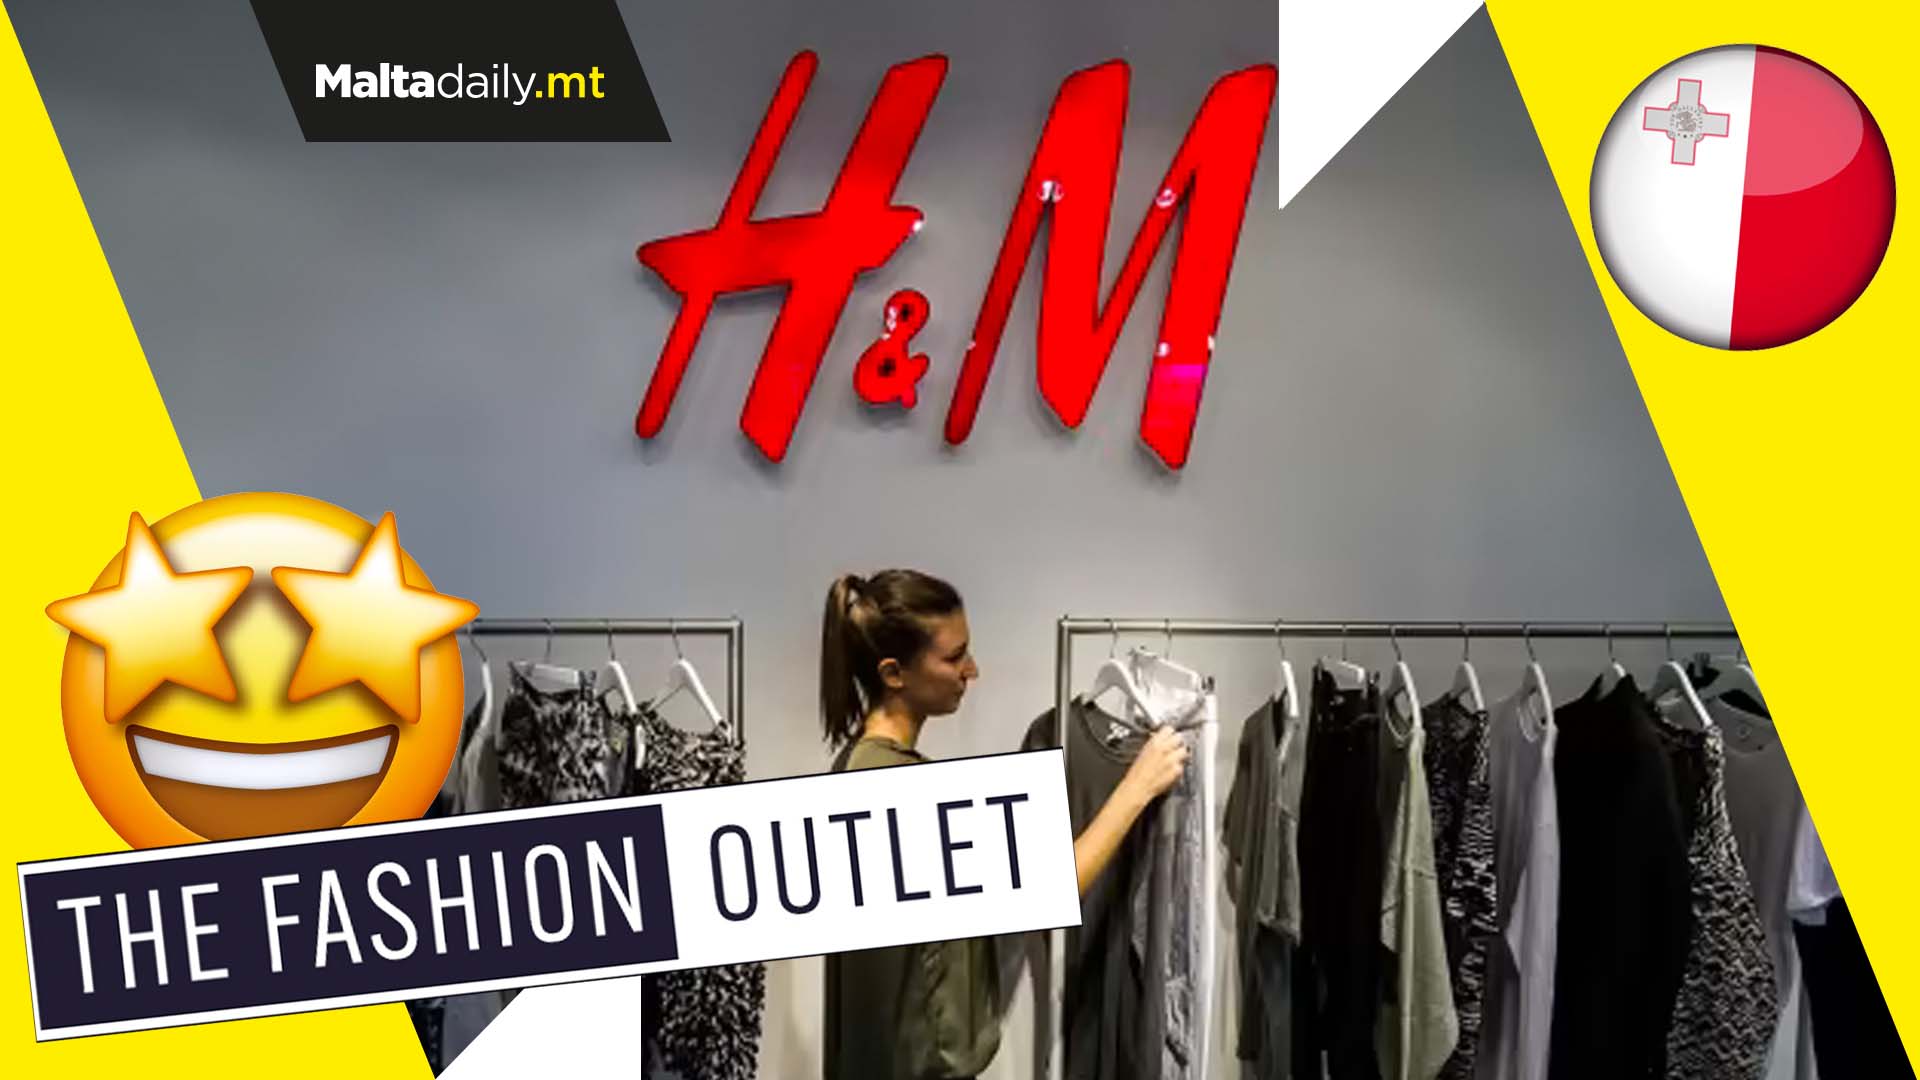 You can finally buy H&M products from Malta!